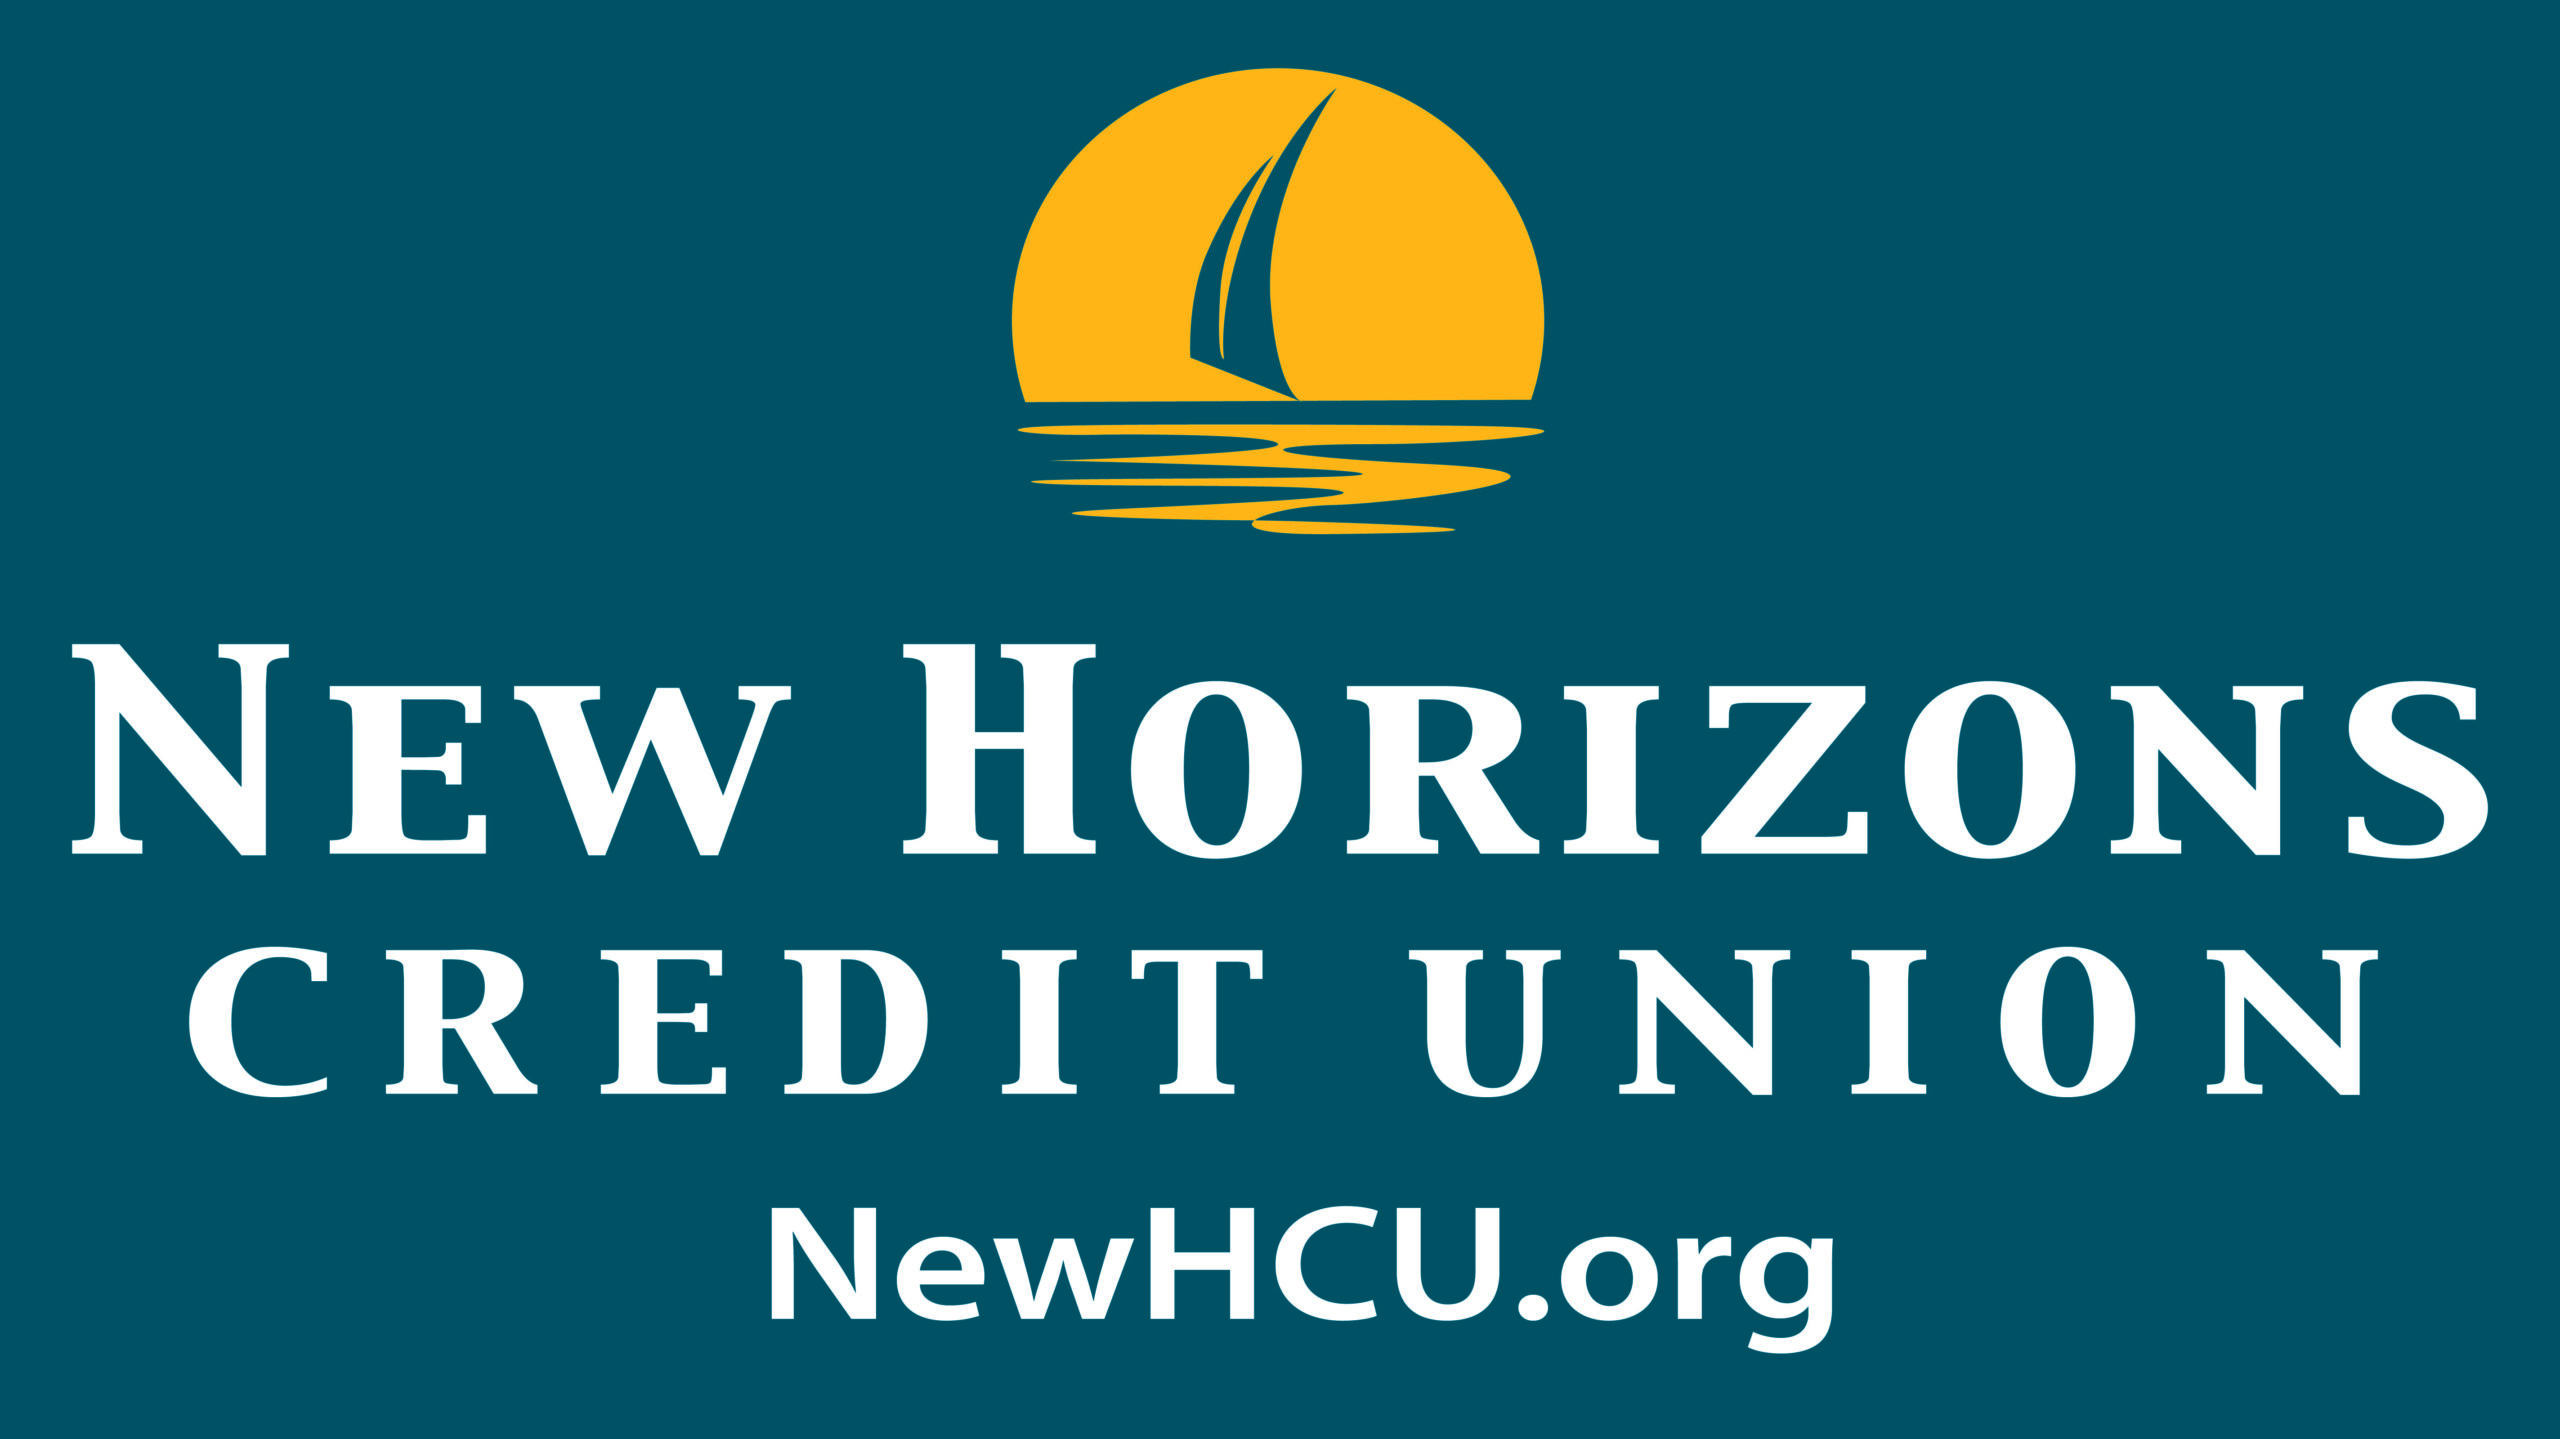 NEW HORIZONS CREDIT UNION Listed as One of America’s Best Regional Financial Institutions in Newsweek